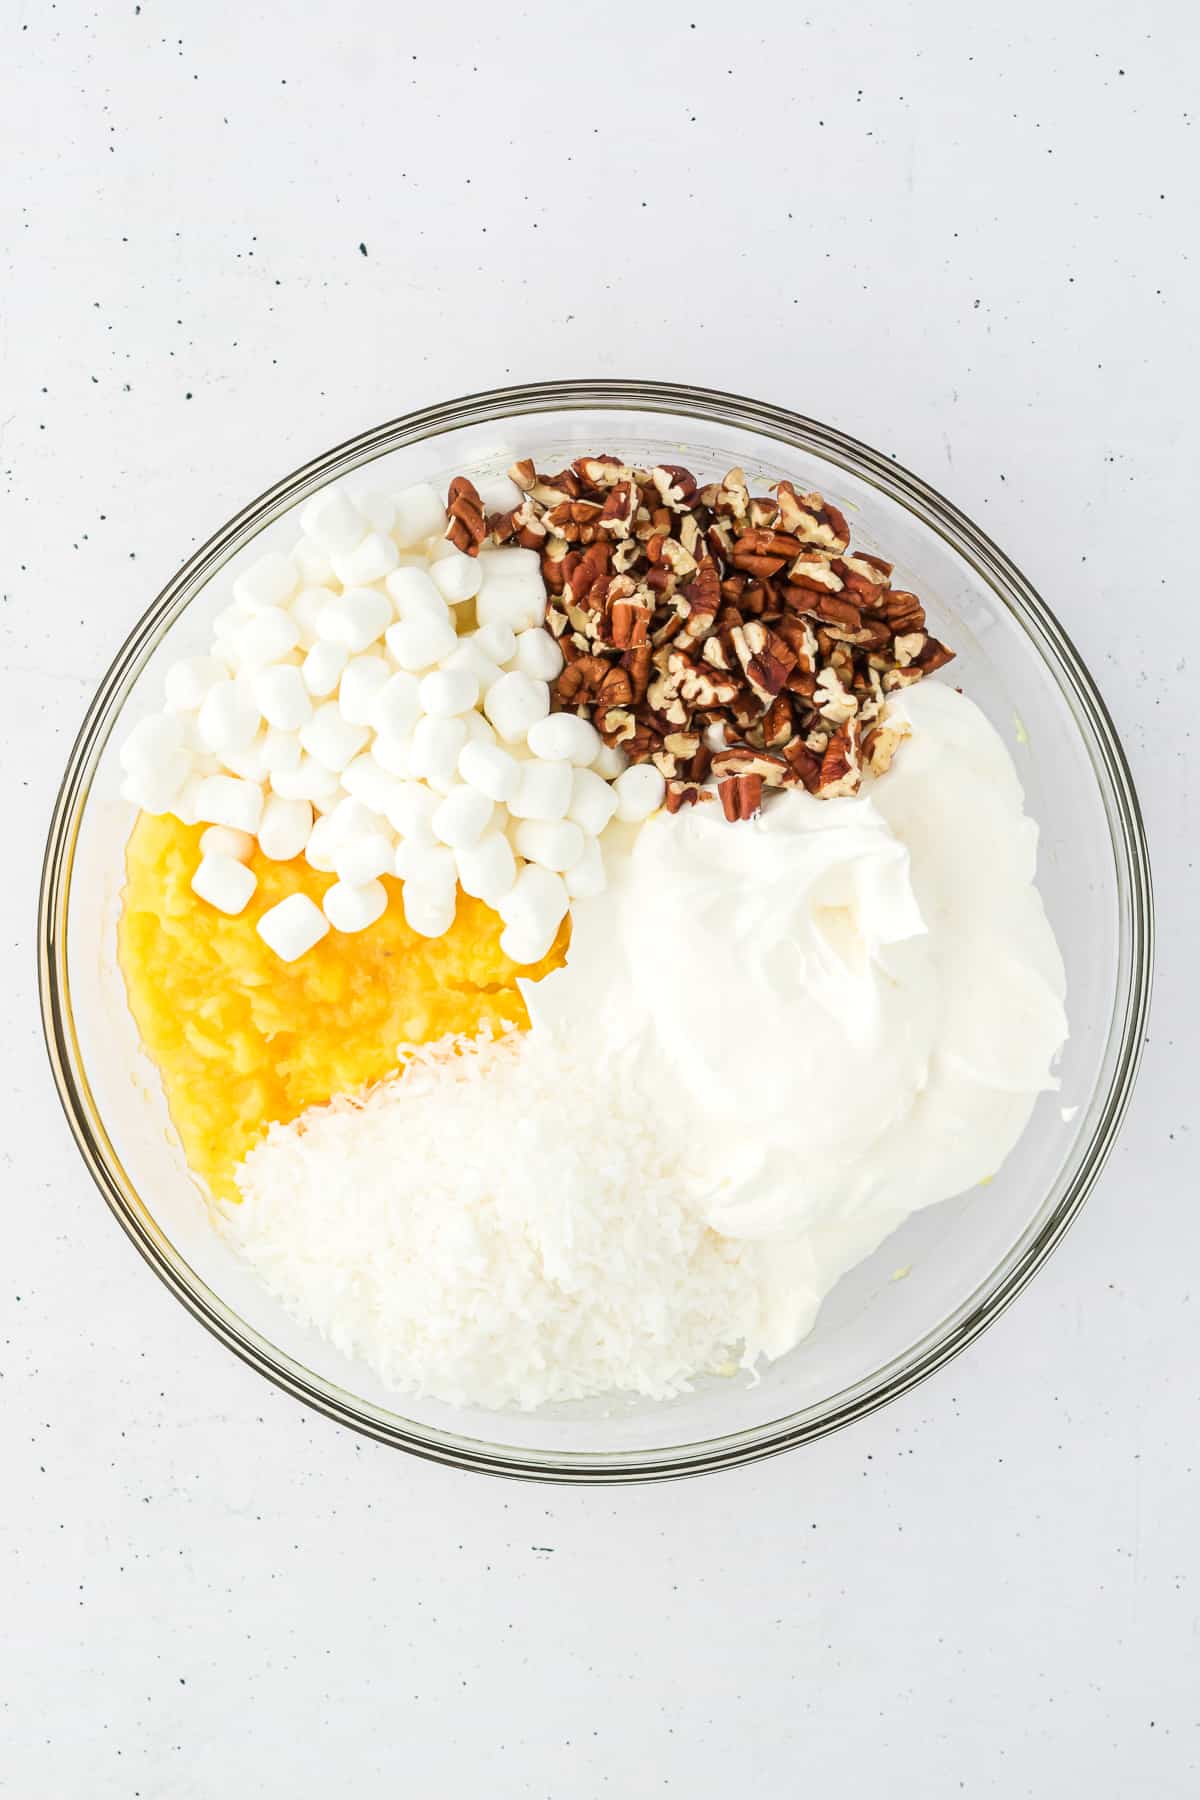 Ingredients for pineapple fluff in a clear glass bowl including crushed pineapple, mini marshmallows, nuts, cool whip and shredded coconut